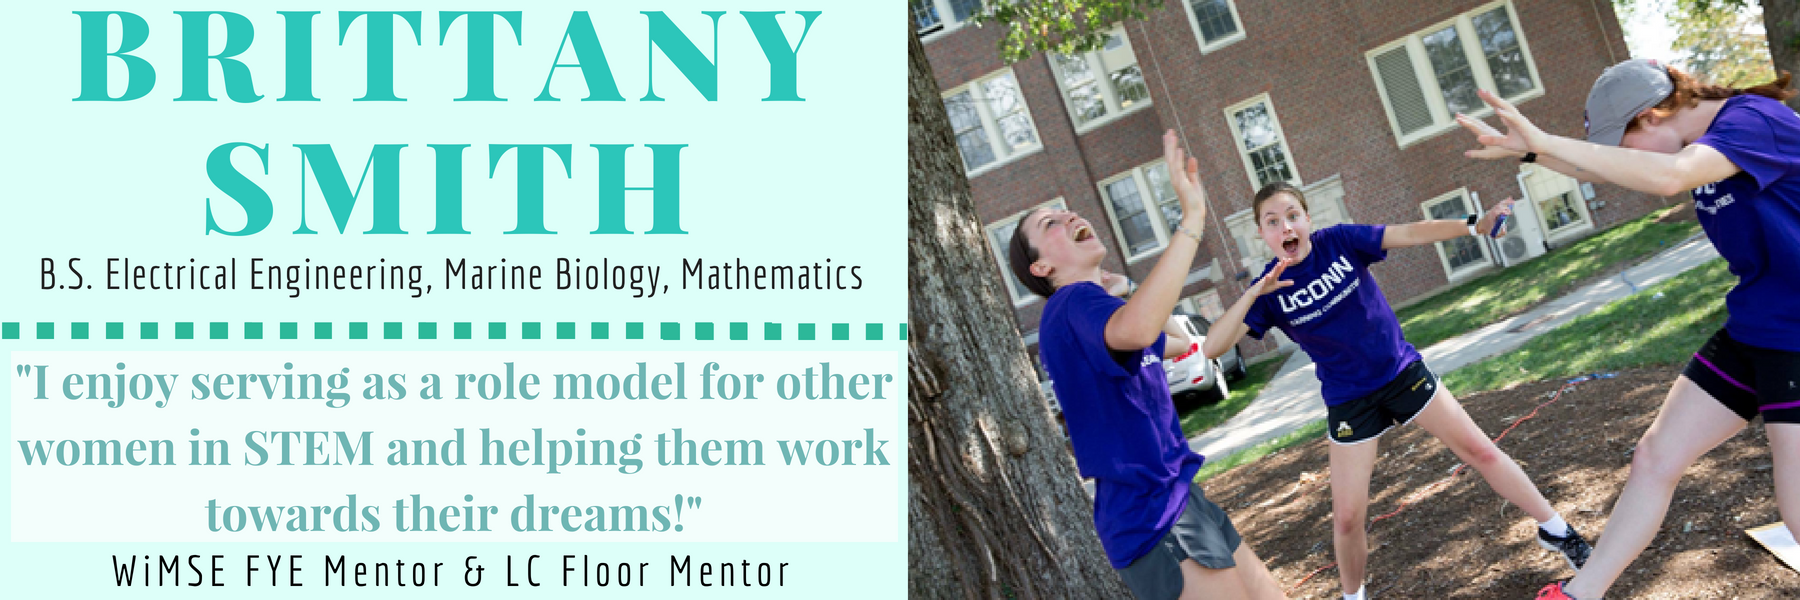 Brittany Smith Why I mentor